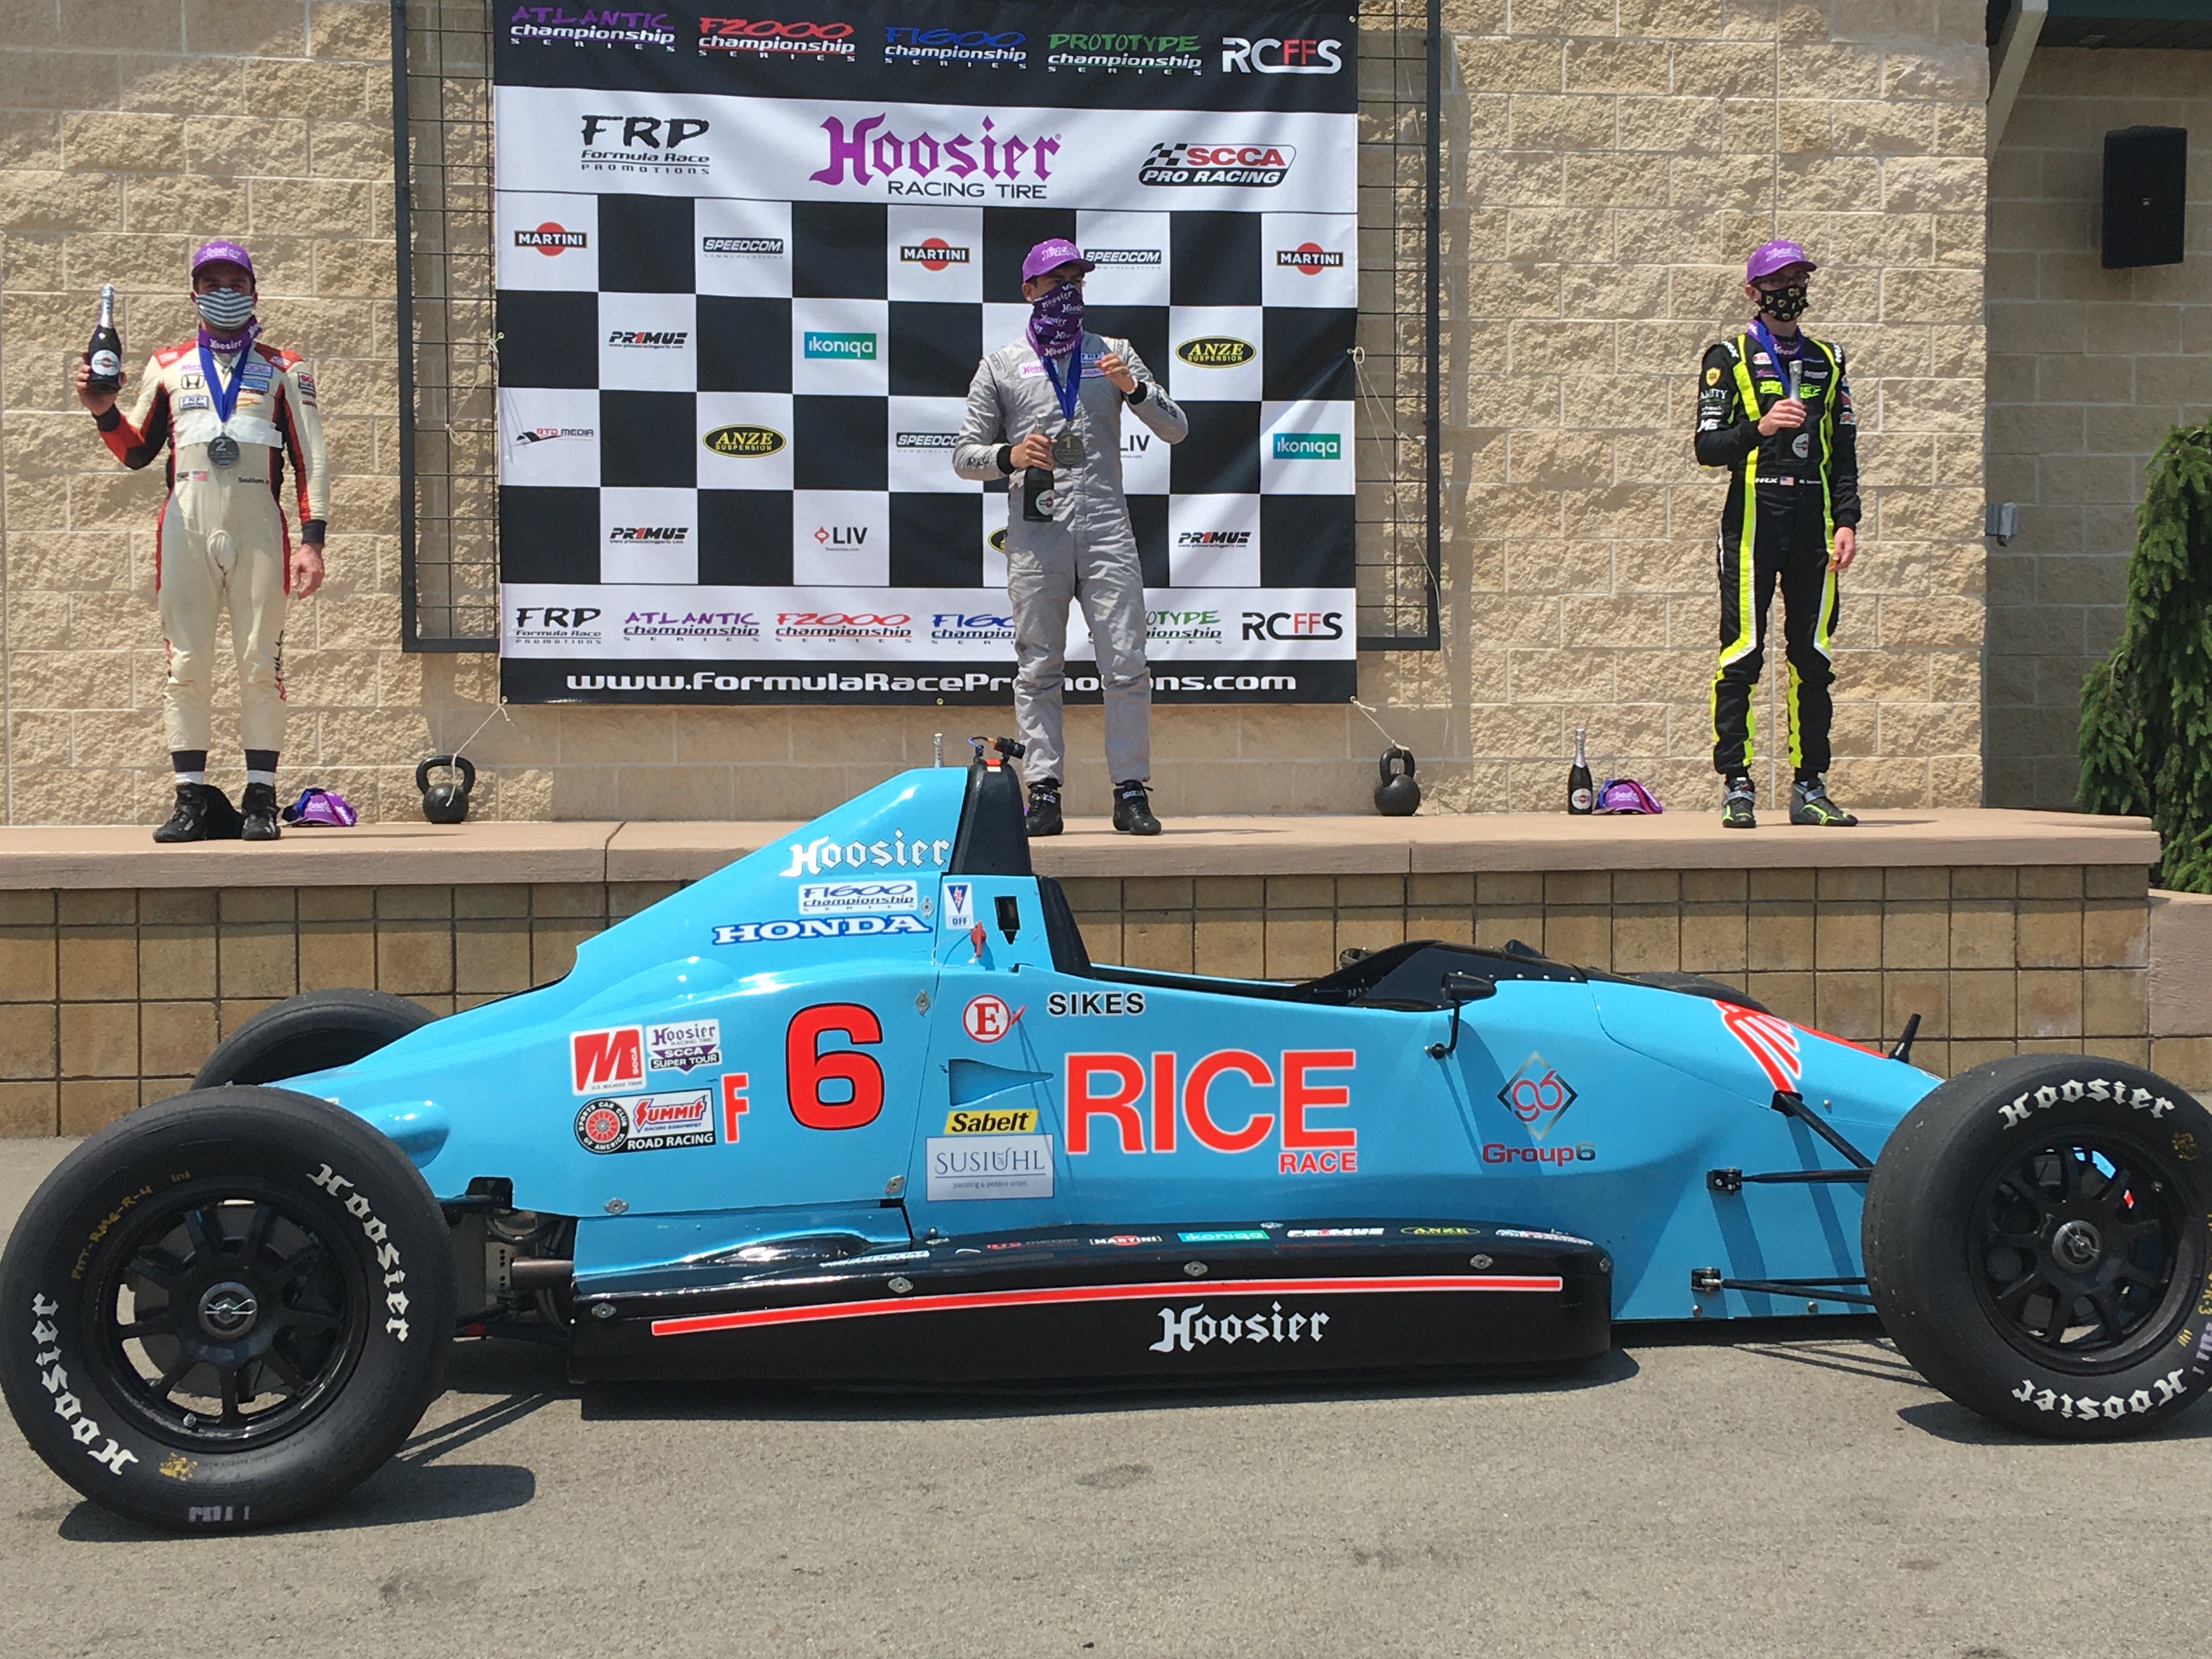 Sikes and RiceRace Sweep FRP at PIRC